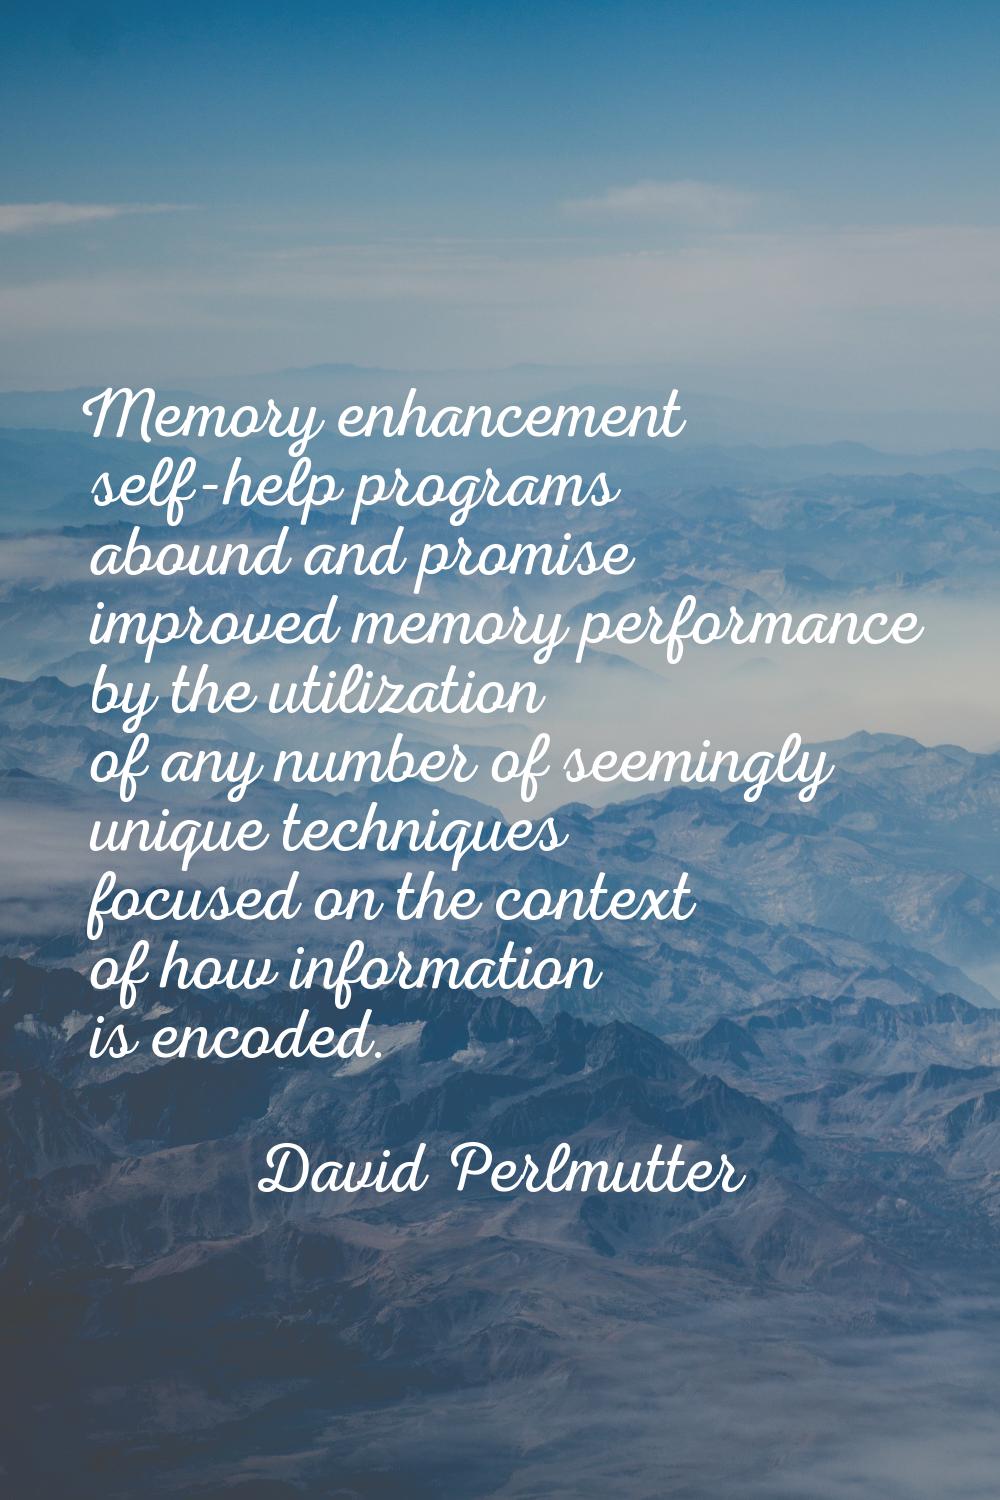 Memory enhancement self-help programs abound and promise improved memory performance by the utiliza